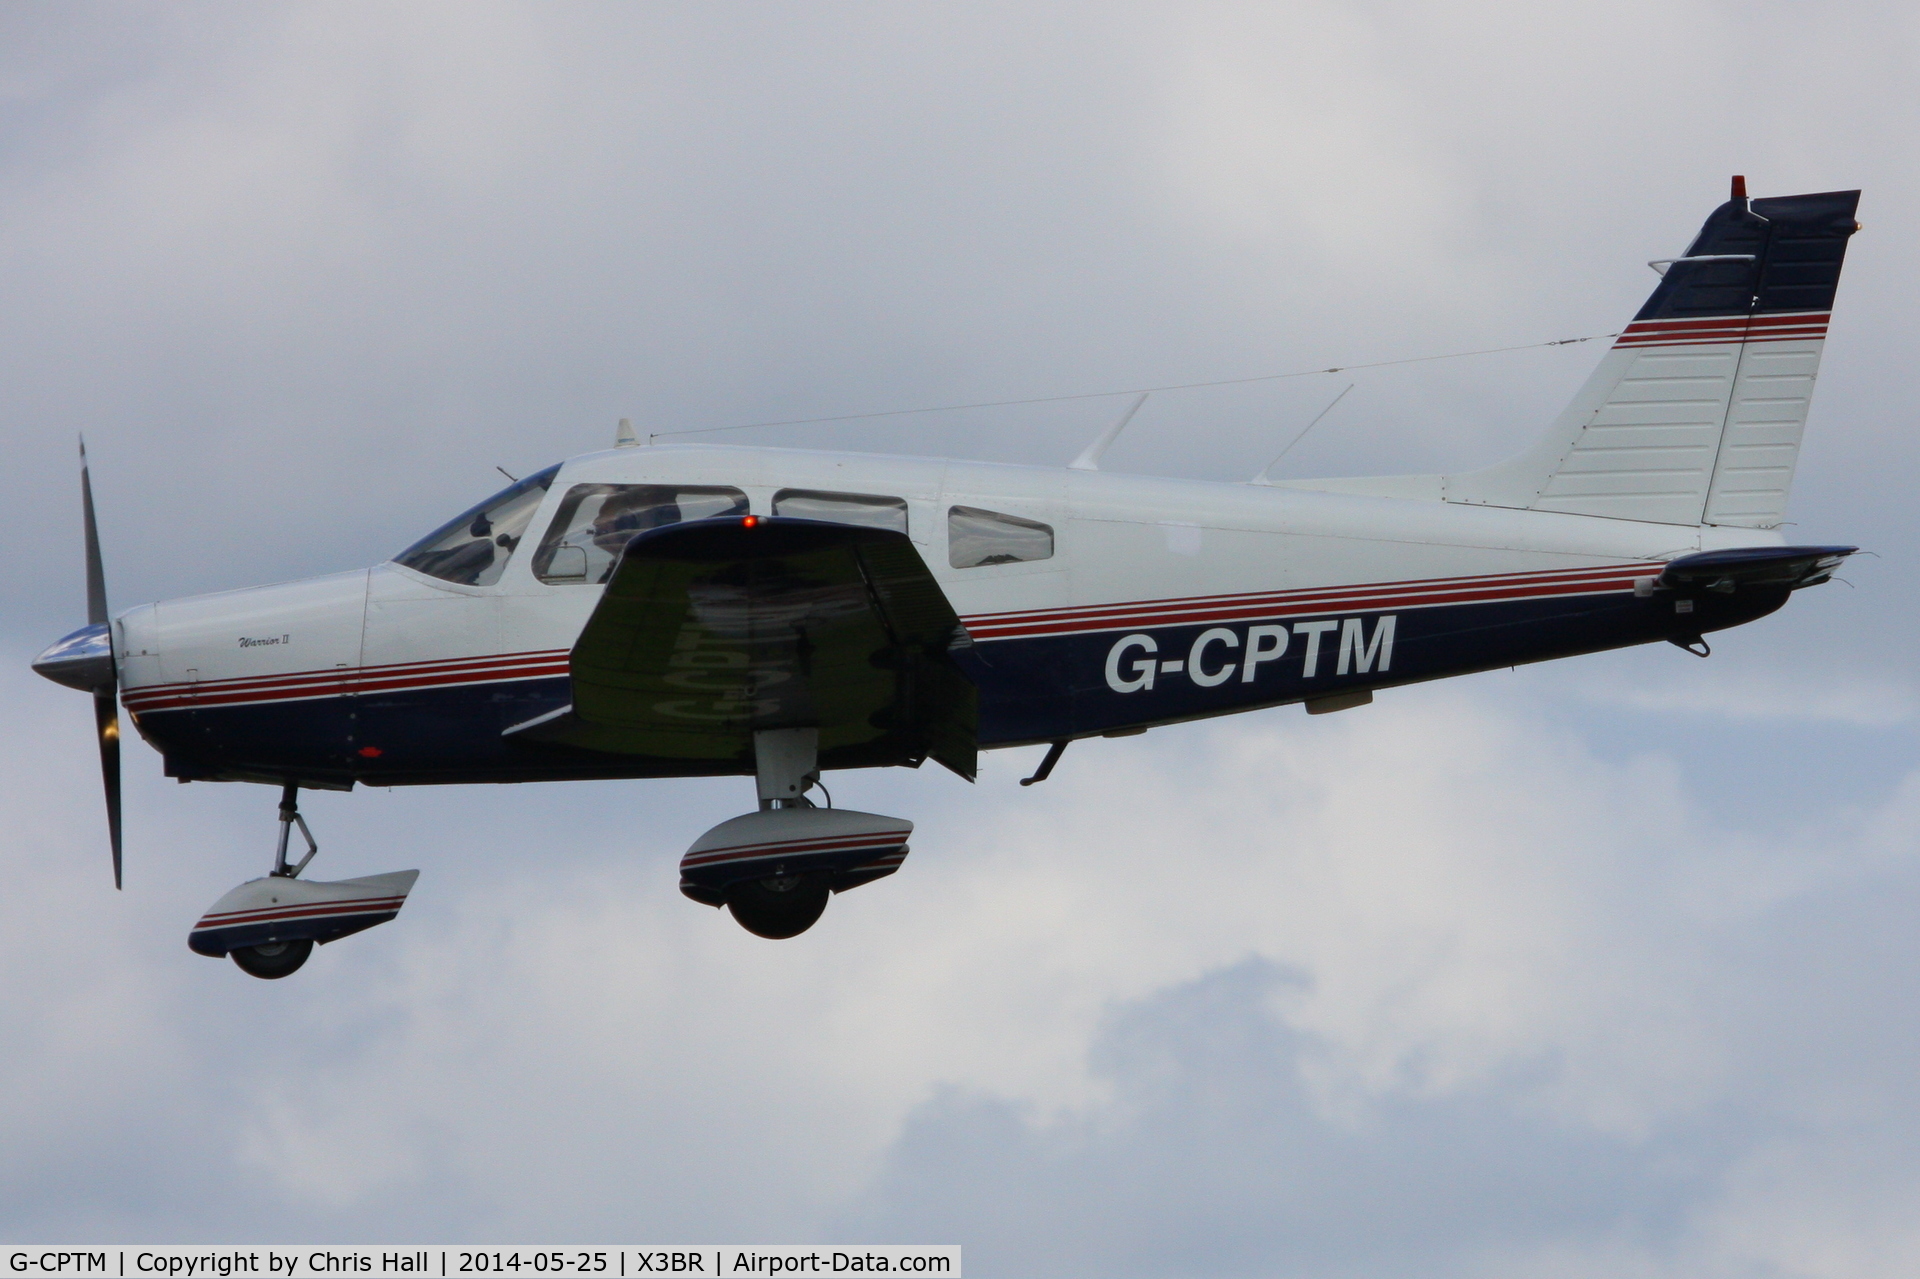 G-CPTM, 1977 Piper PA-28-151 Cherokee Warrior C/N 28-7715012, visitor at the Cold War Jets Open Day 2014